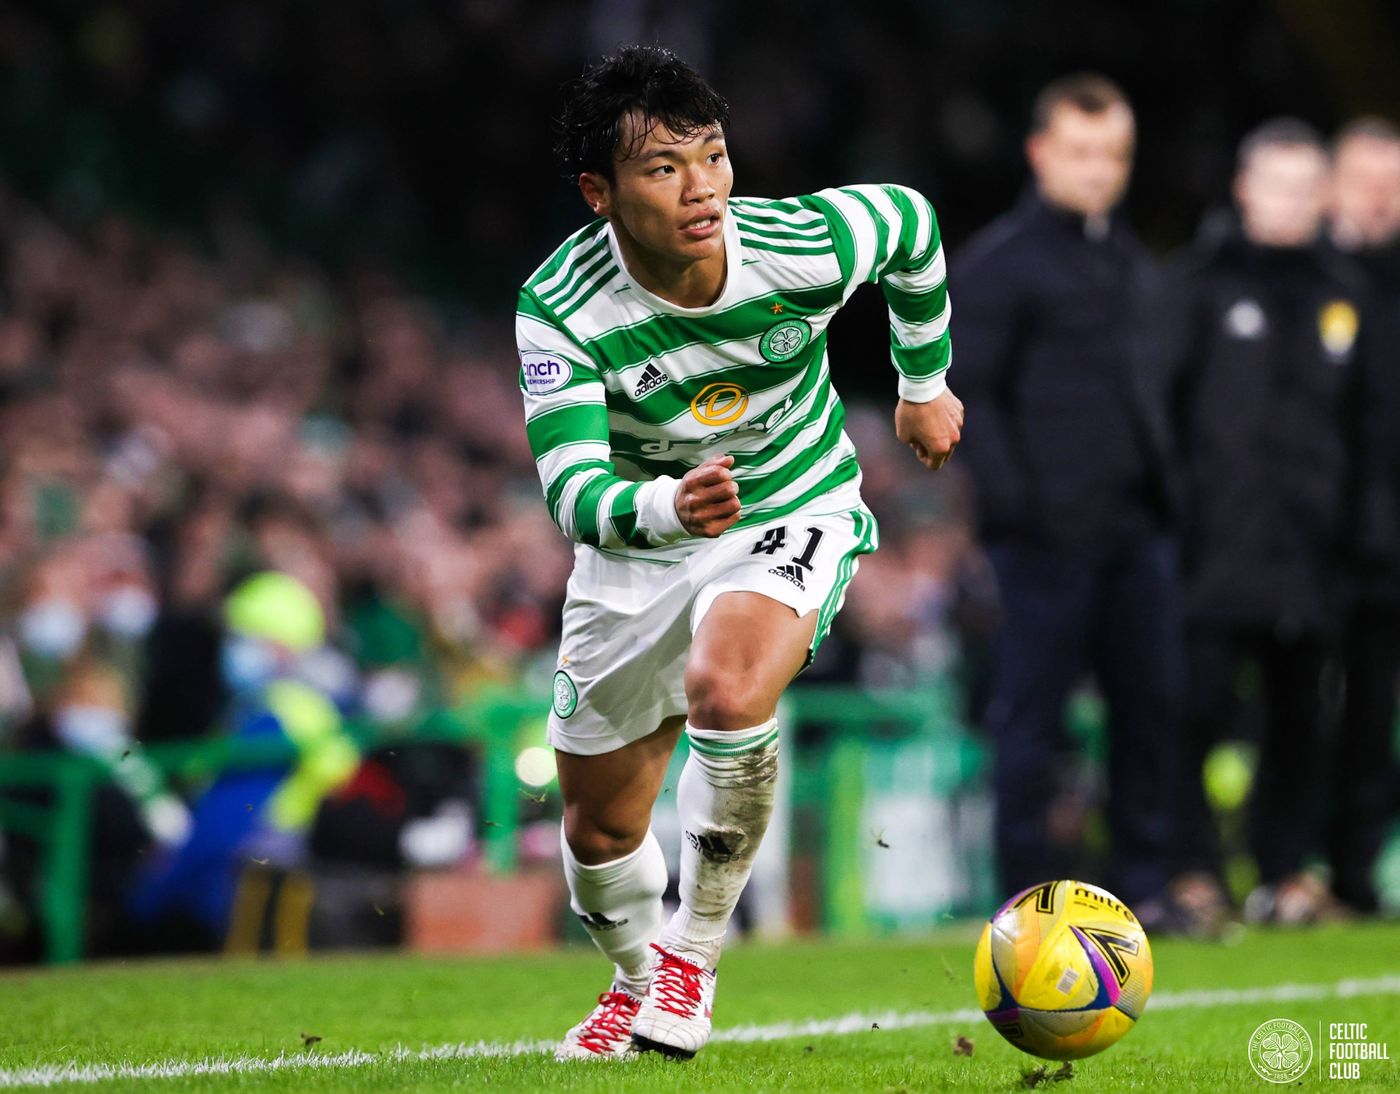 BBC Report: Celtic injury blow as tearful Hatate forced off injured against Atletico…